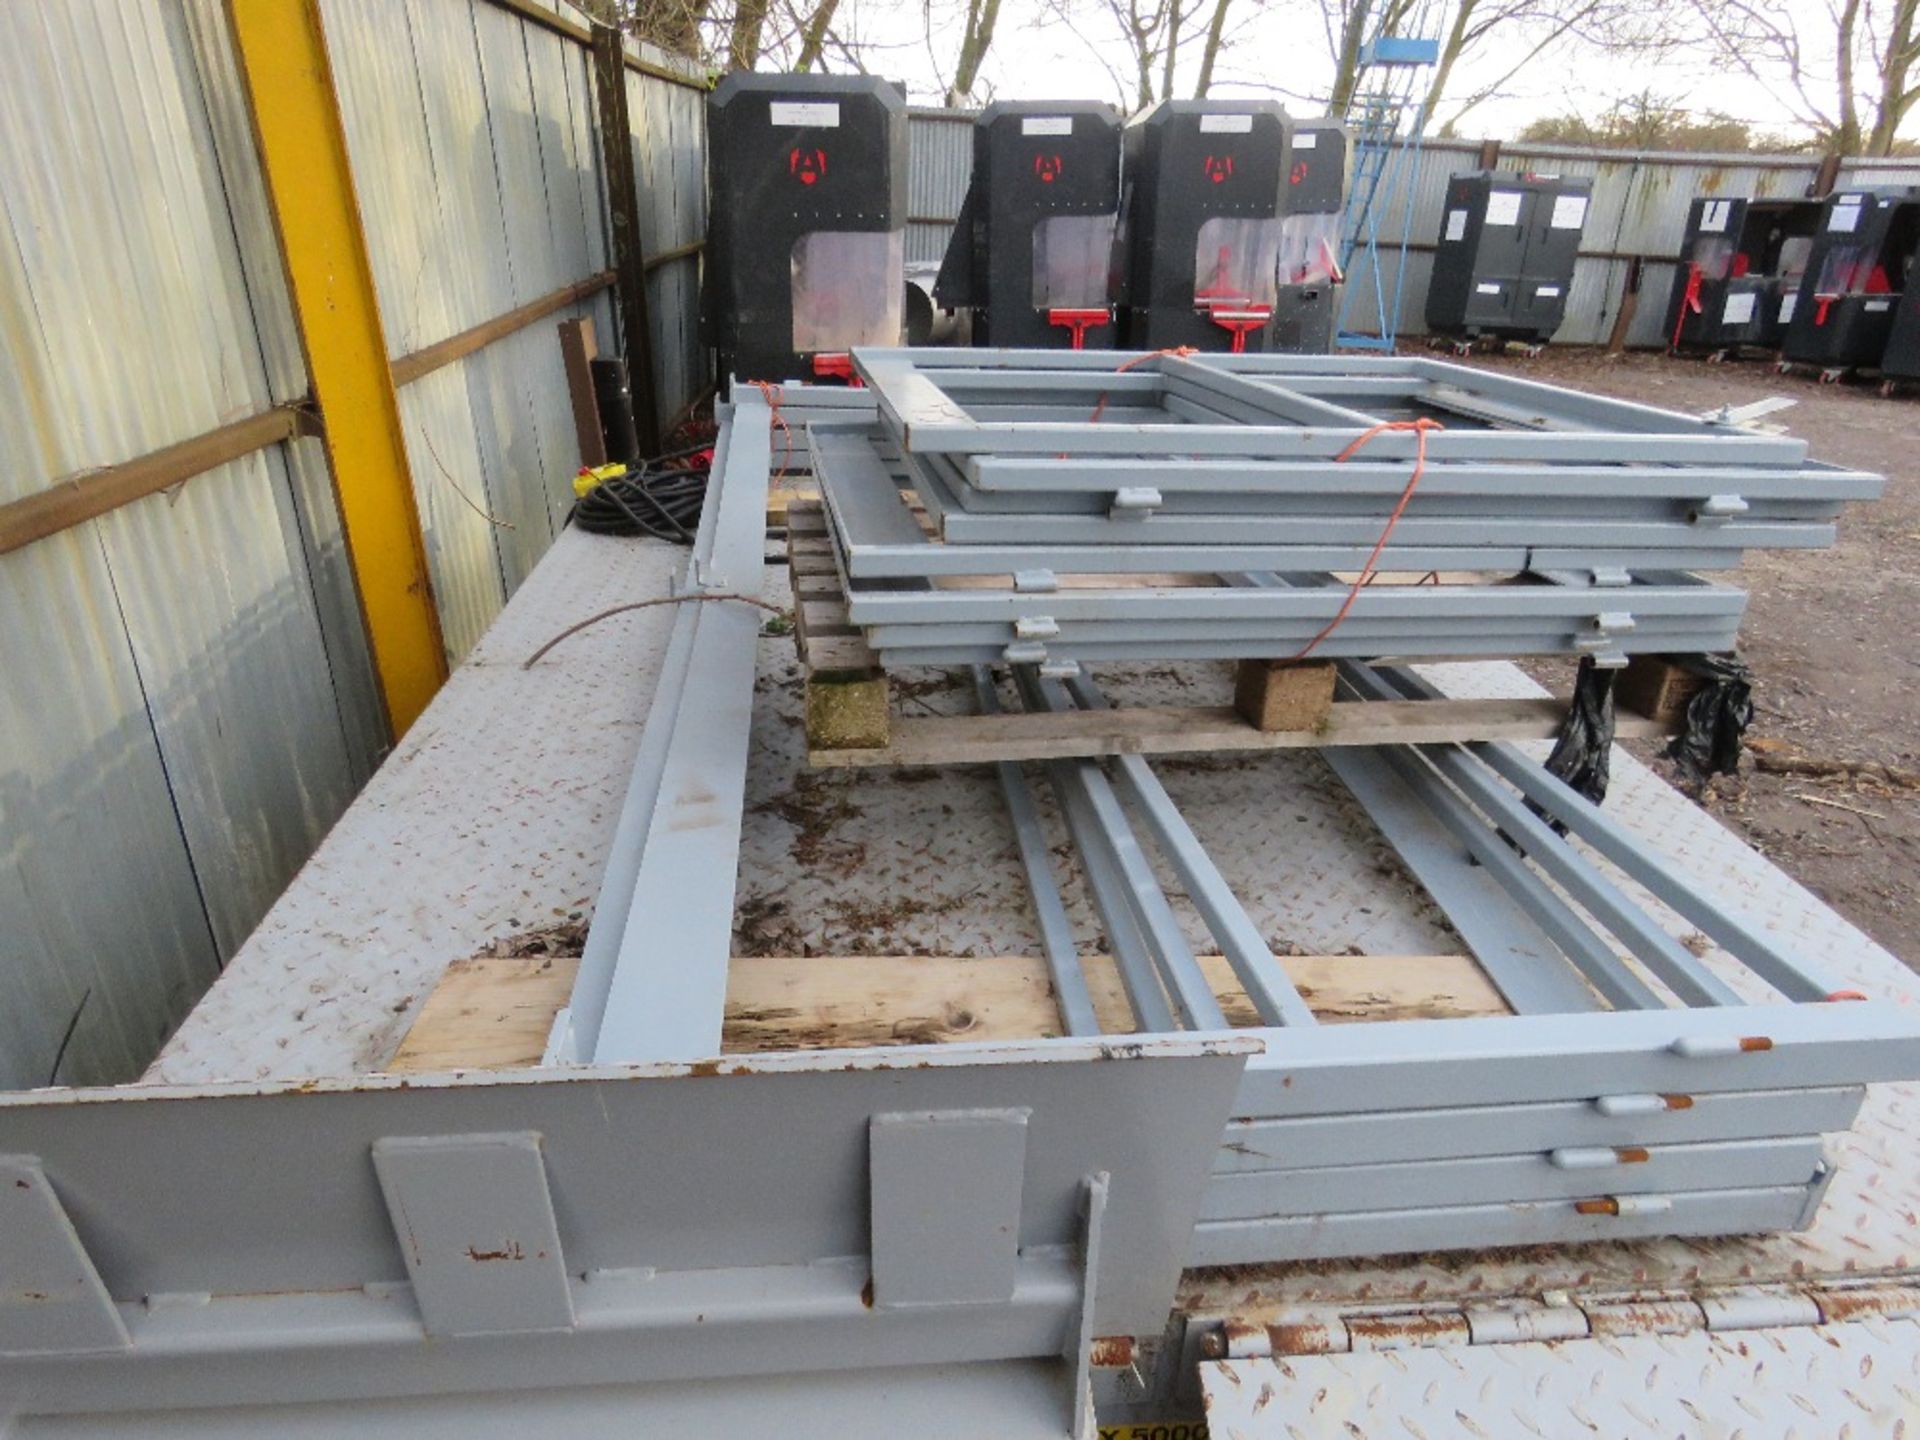 SAXLIFT MEZZANINE ACCESS SCISSOR LIFT DECK,5 TONNE RATED, 3 PHASE POWERED WITH SIDE SAFETY RAILS. 3M - Image 3 of 6